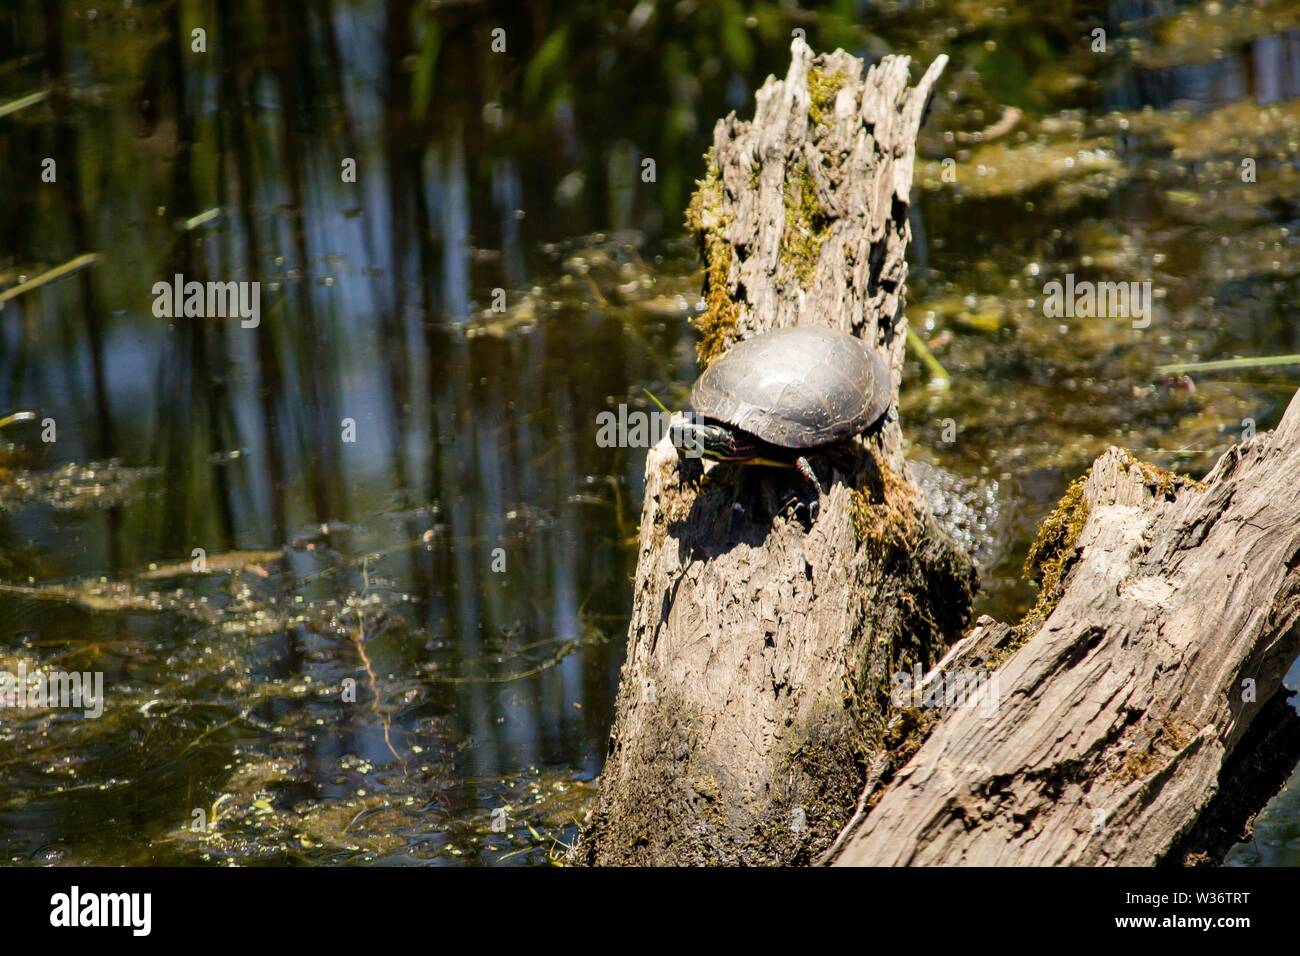 Painted turtle resting on a branch in water Stock Photo